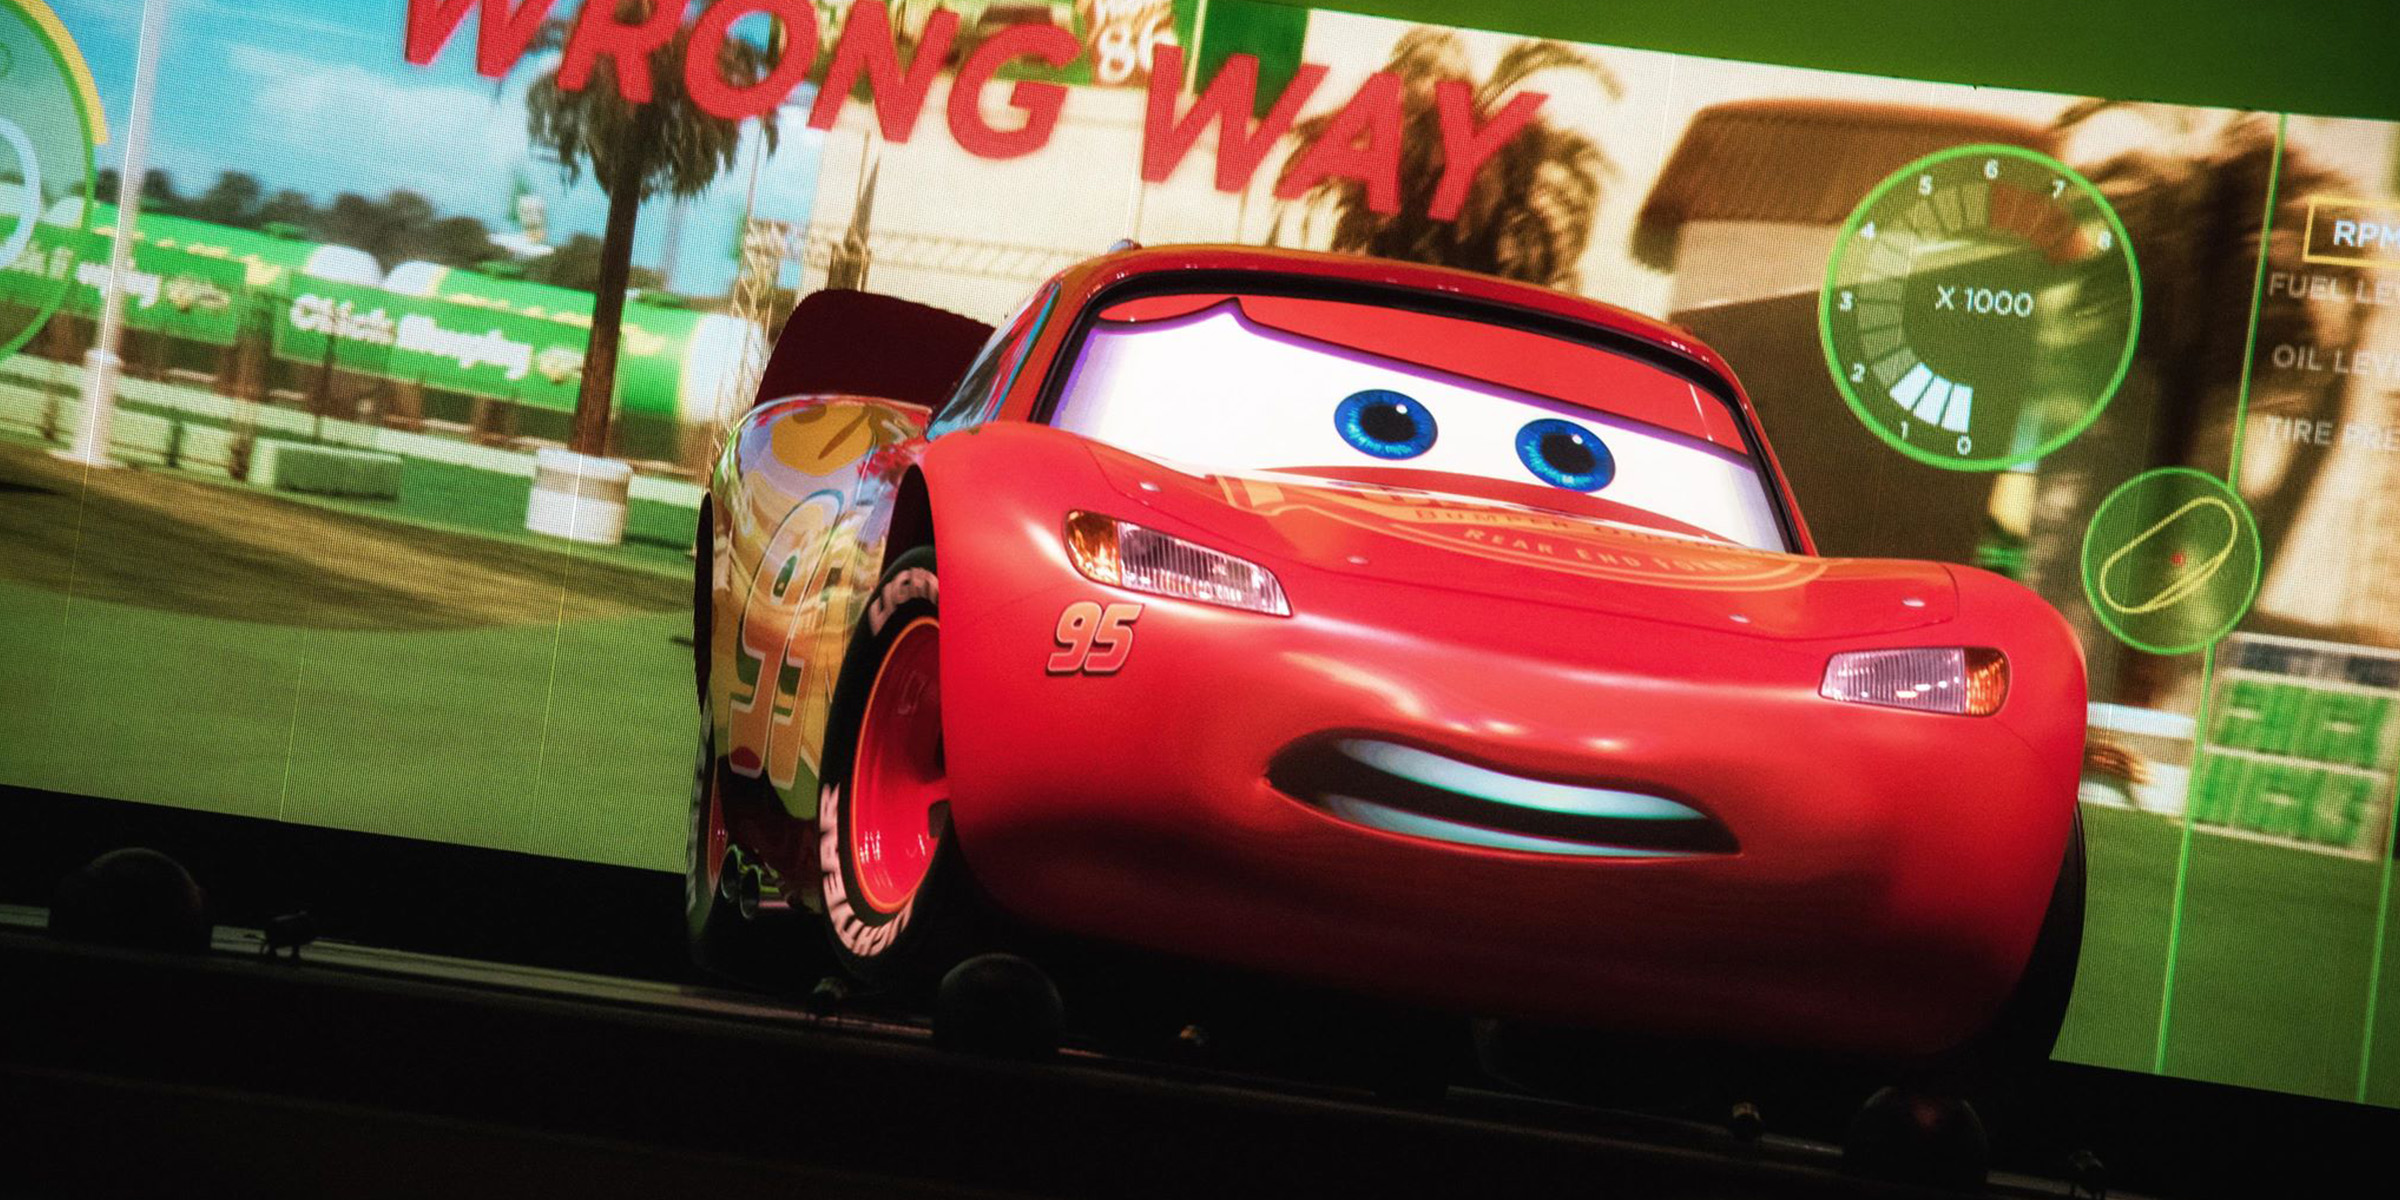 5 Things We Loved About Lightning McQueen's Racing Academy in